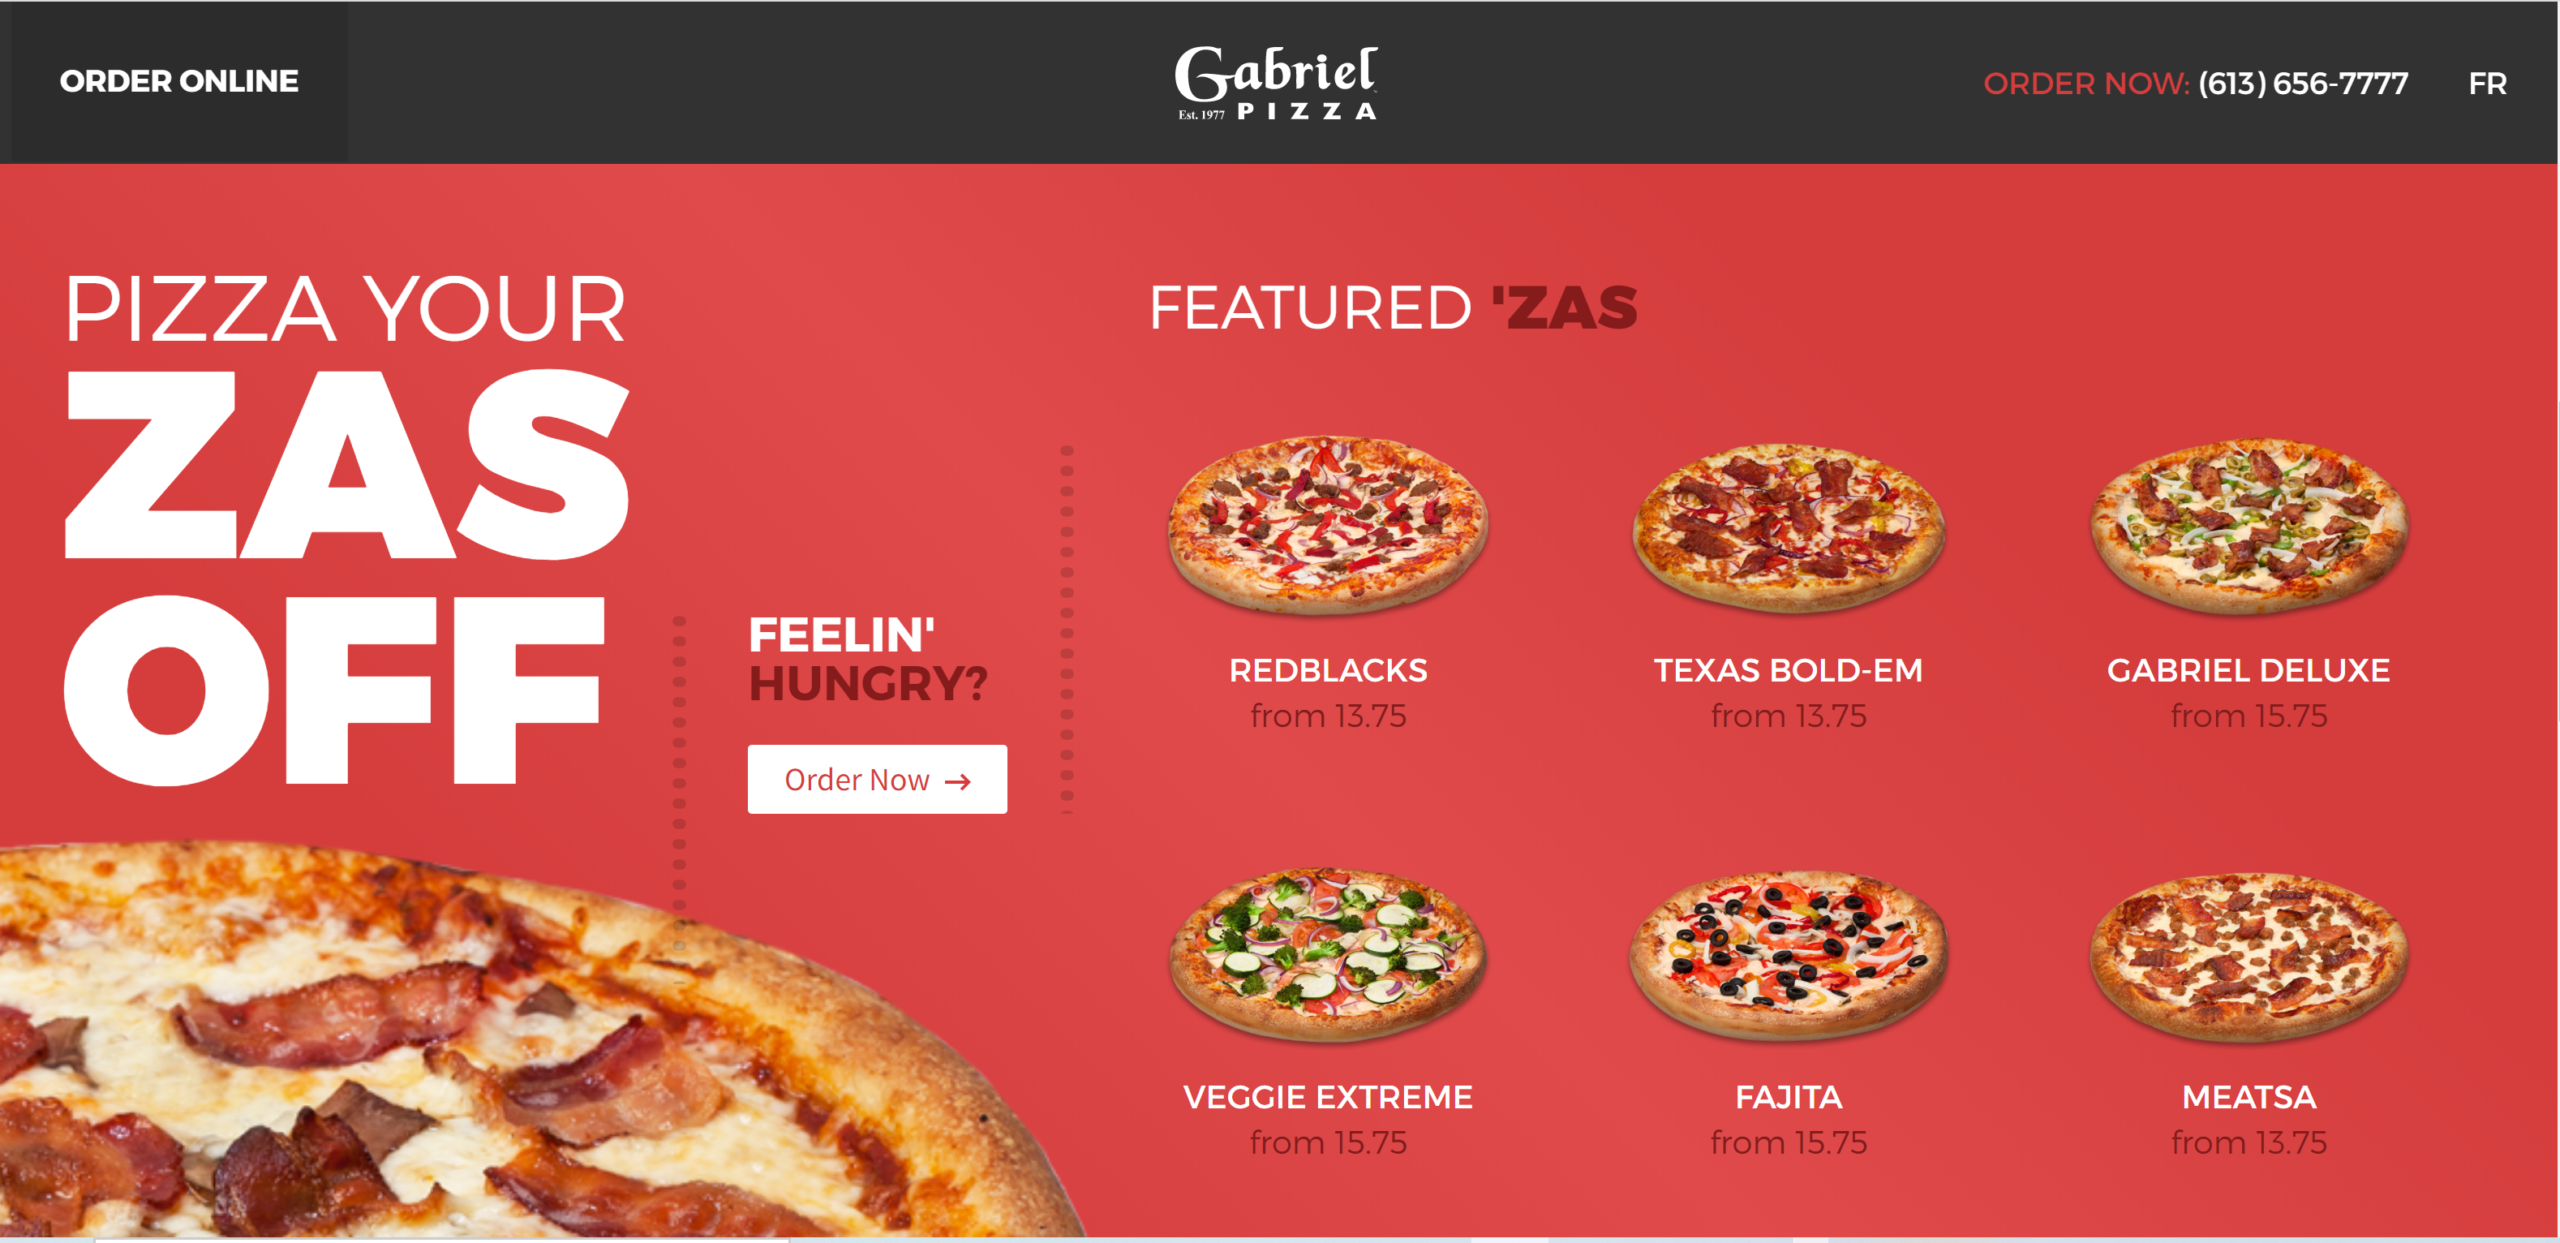 Gabriel Pizza – pizza restaurant running in Canadian provinces